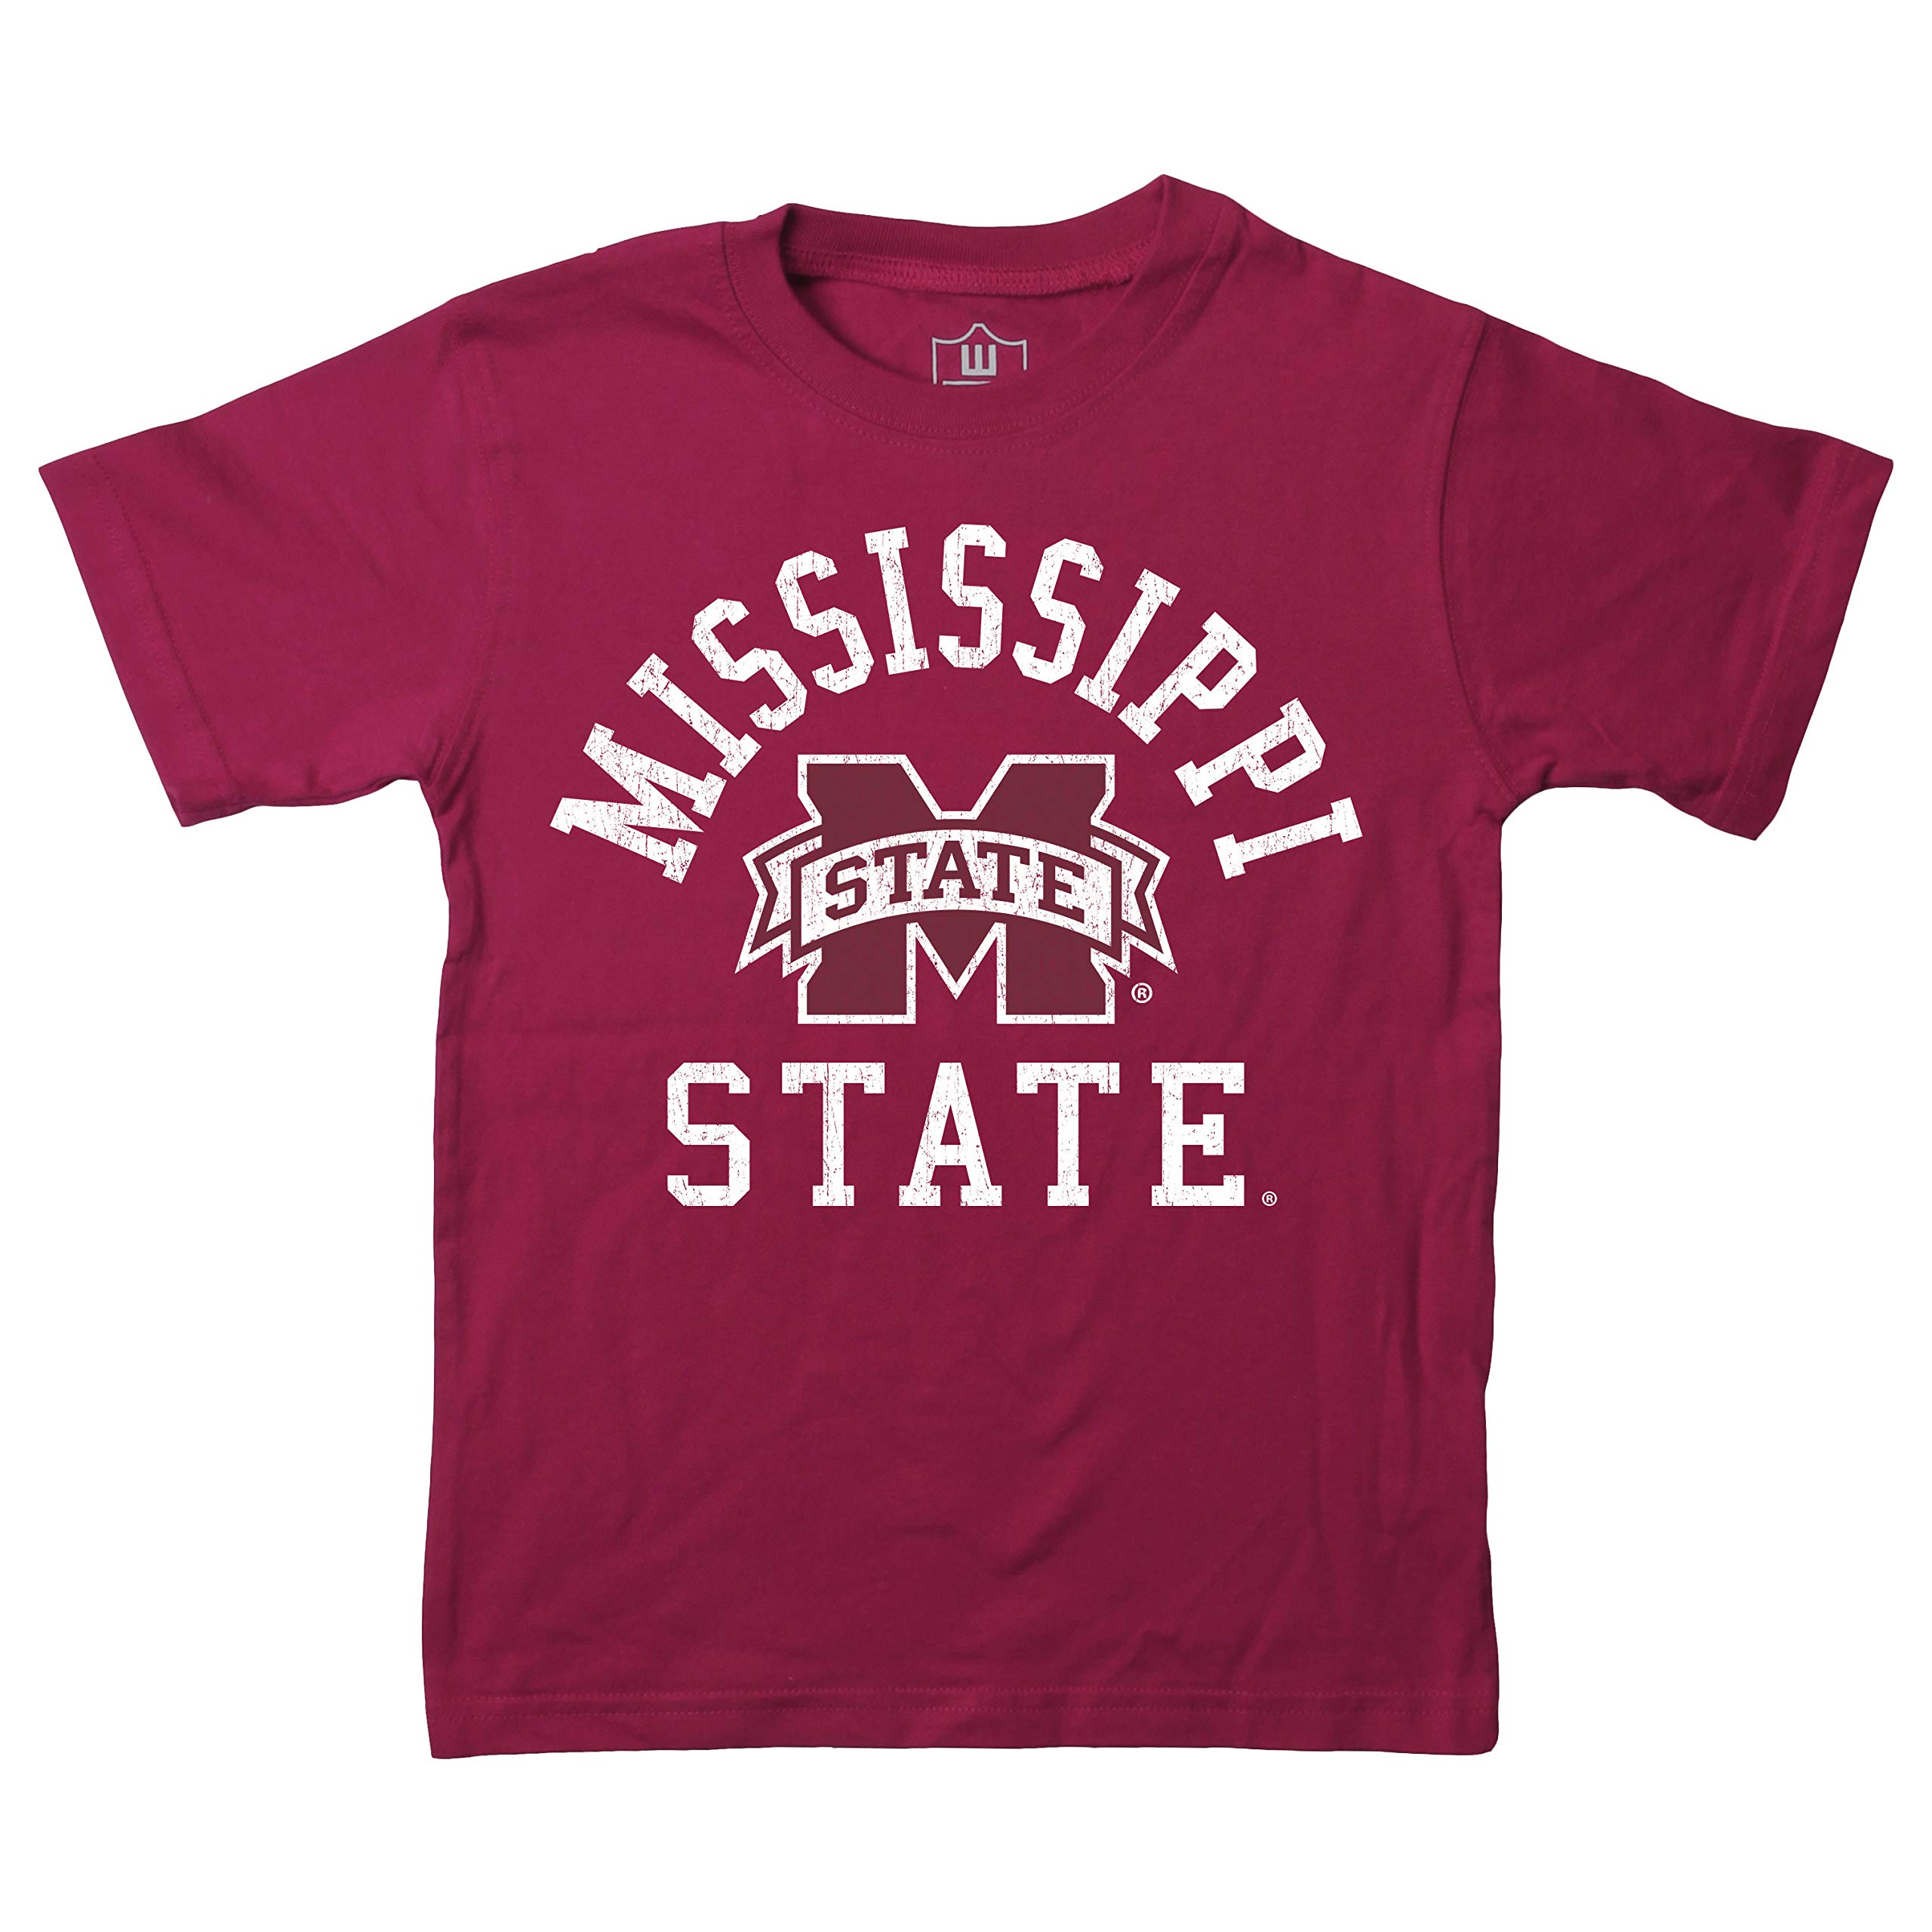 Wes and Willy NCAA Kids S/S Organic Cotton Tee Shirt, Mississippi State Bulldogs, HAR Maroon, XL